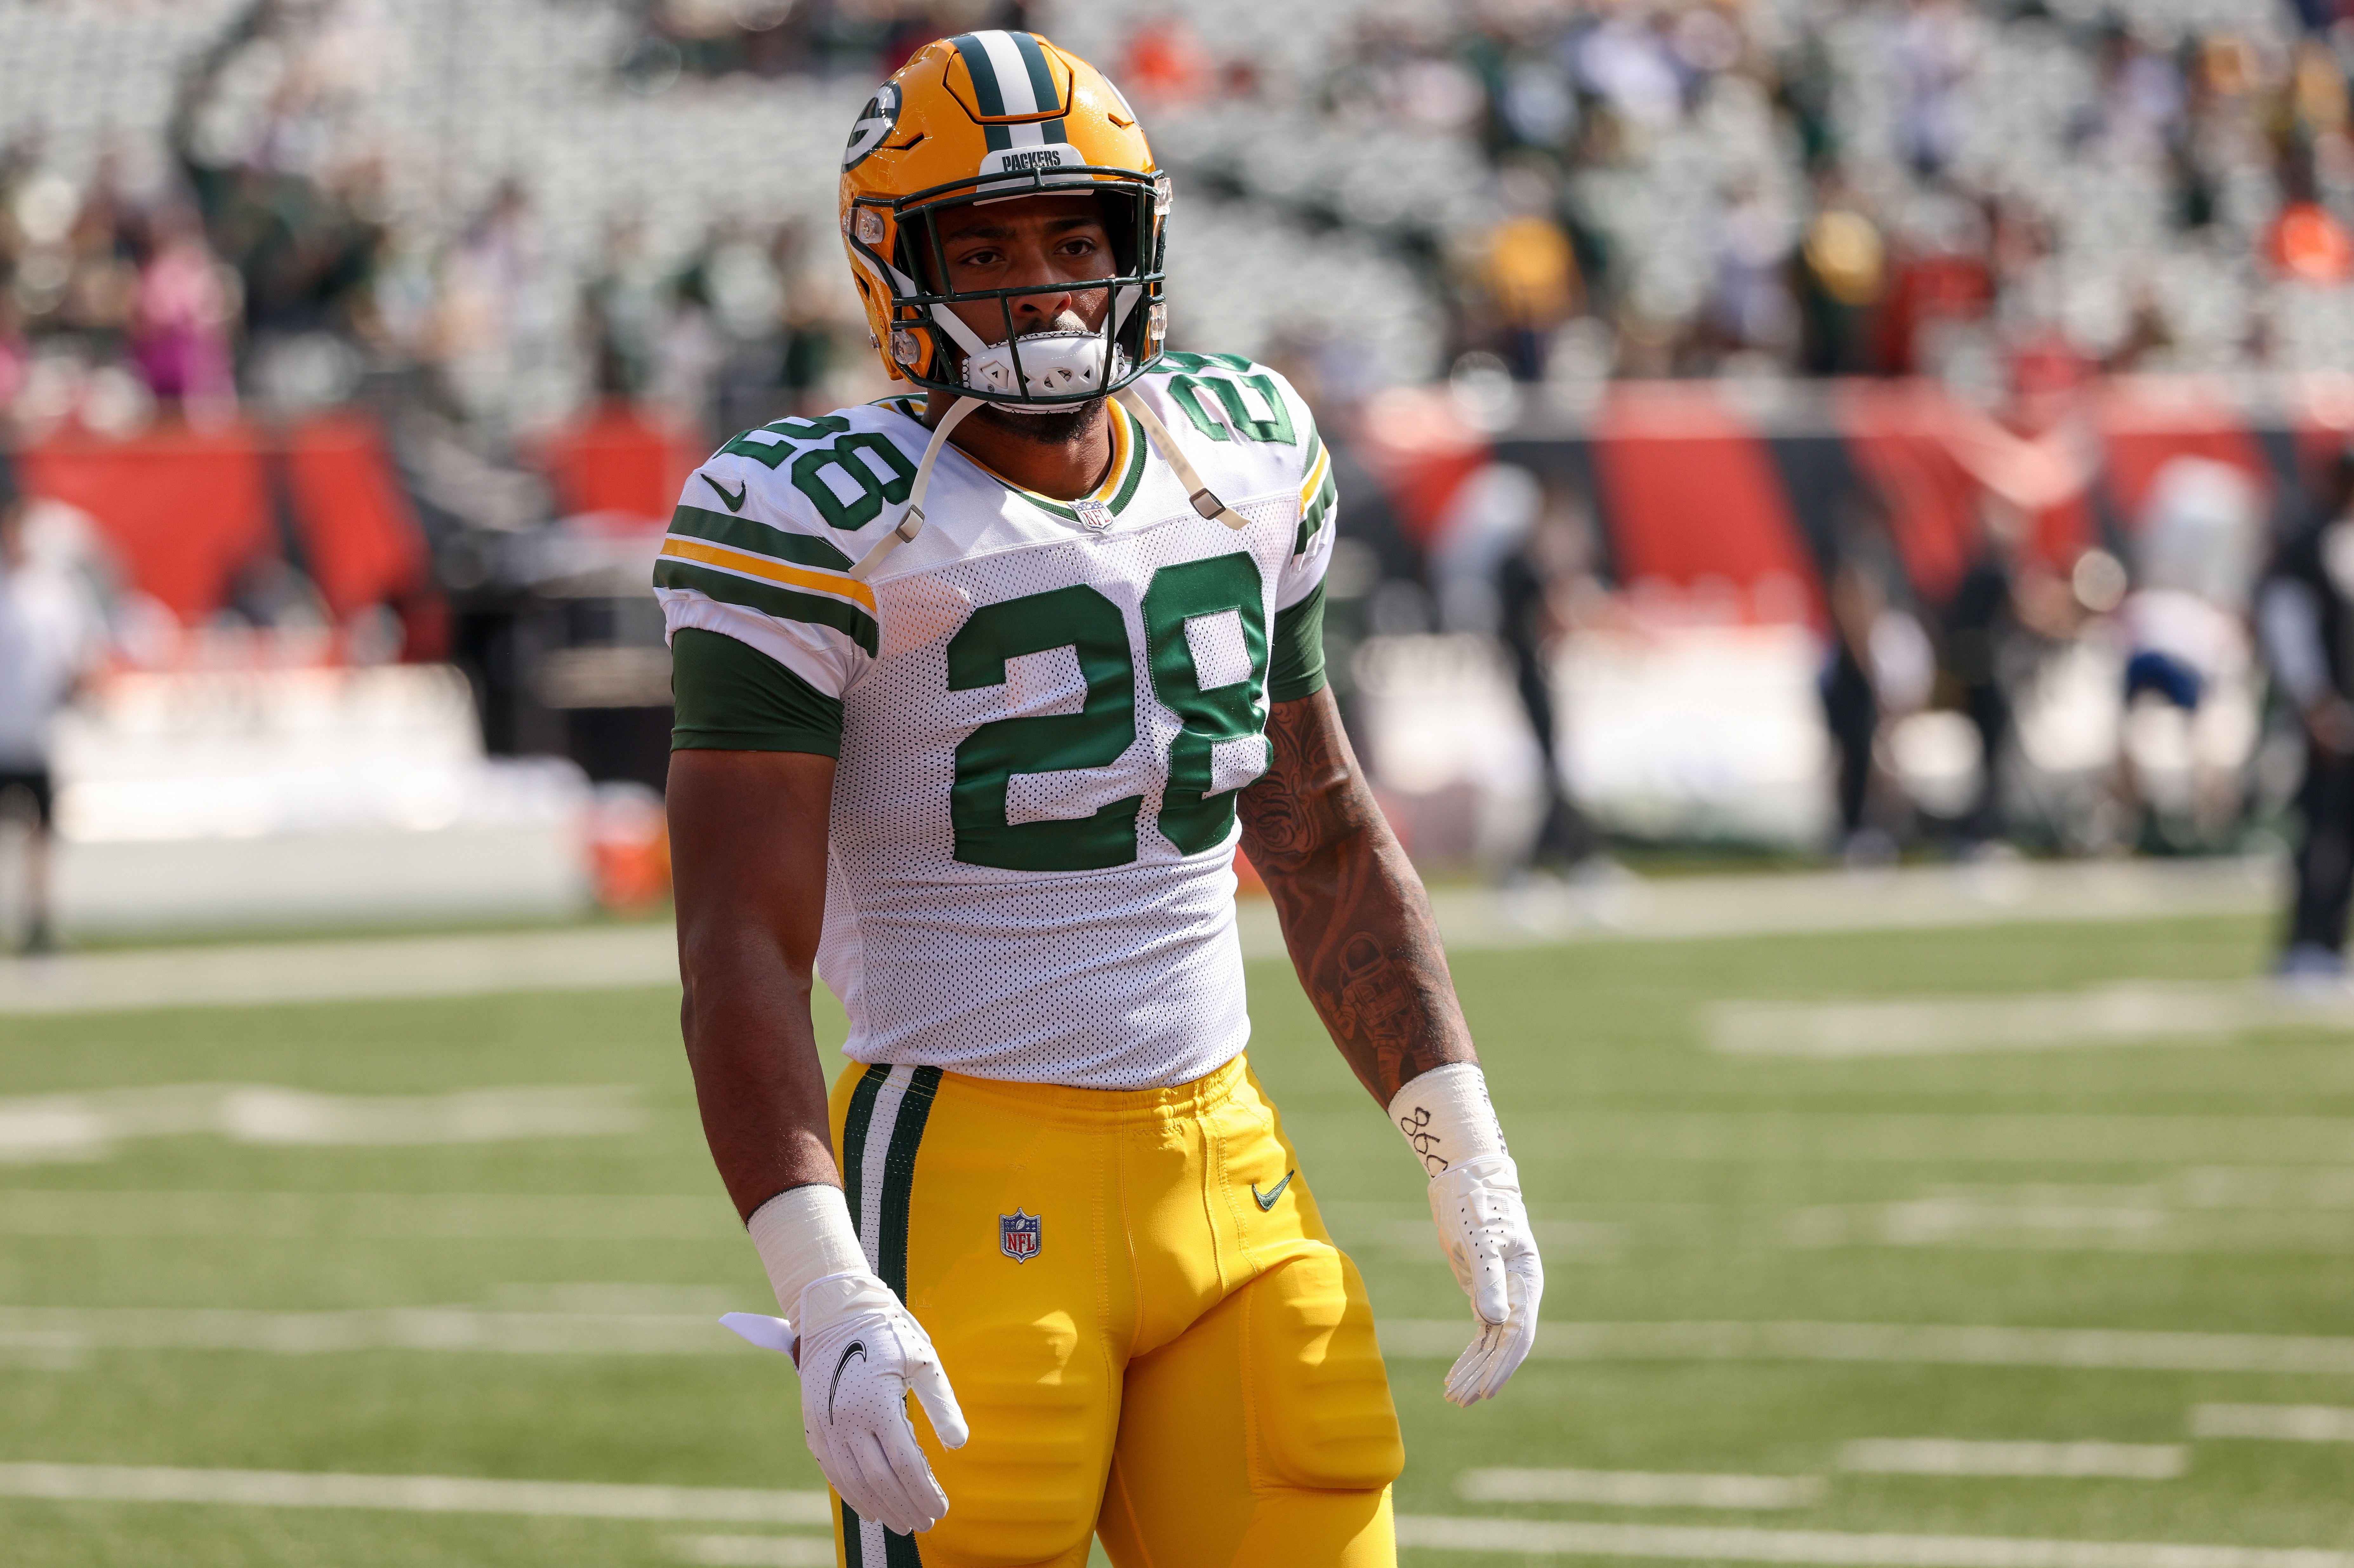 Aaron Jones Could Return, But Expect AJ Dillon To Be The Primary